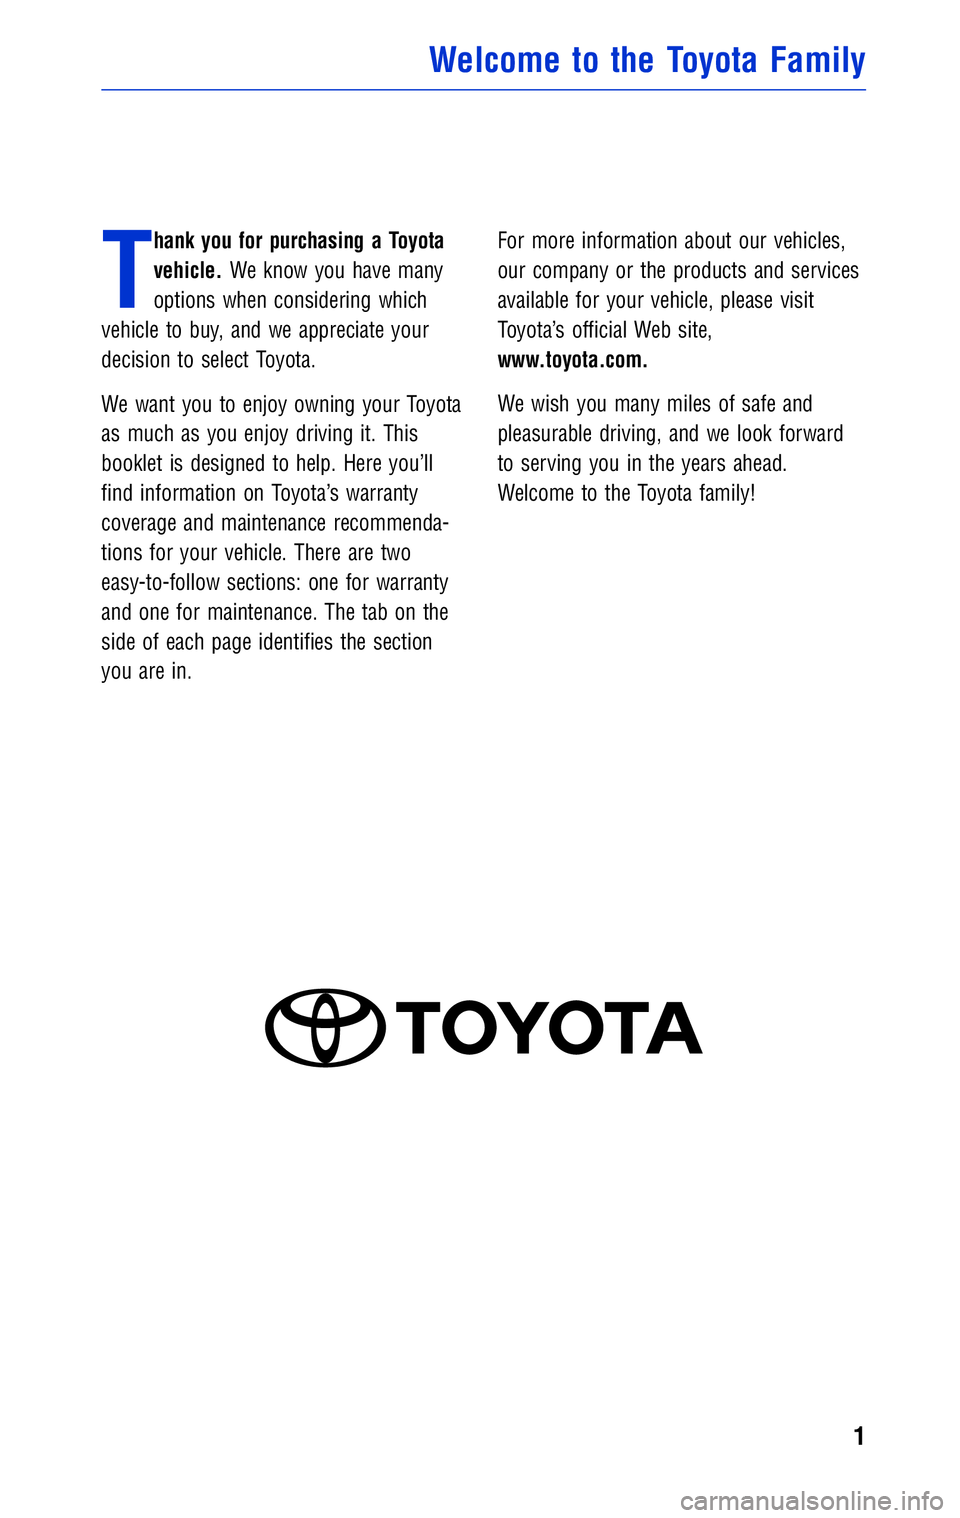 TOYOTA TACOMA 2011  Warranties & Maintenance Guides (in English) JOBNAME: 316782-2011-tac-toyw PAGE: 1 SESS: 12 OUTPUT: Wed May 19 10:51:33 2010 
/tweddle/toyota/sched-maint/316782-en-tac/wg
T
hank you for purchasing a Toyota 
vehicle.We know you have many
options 